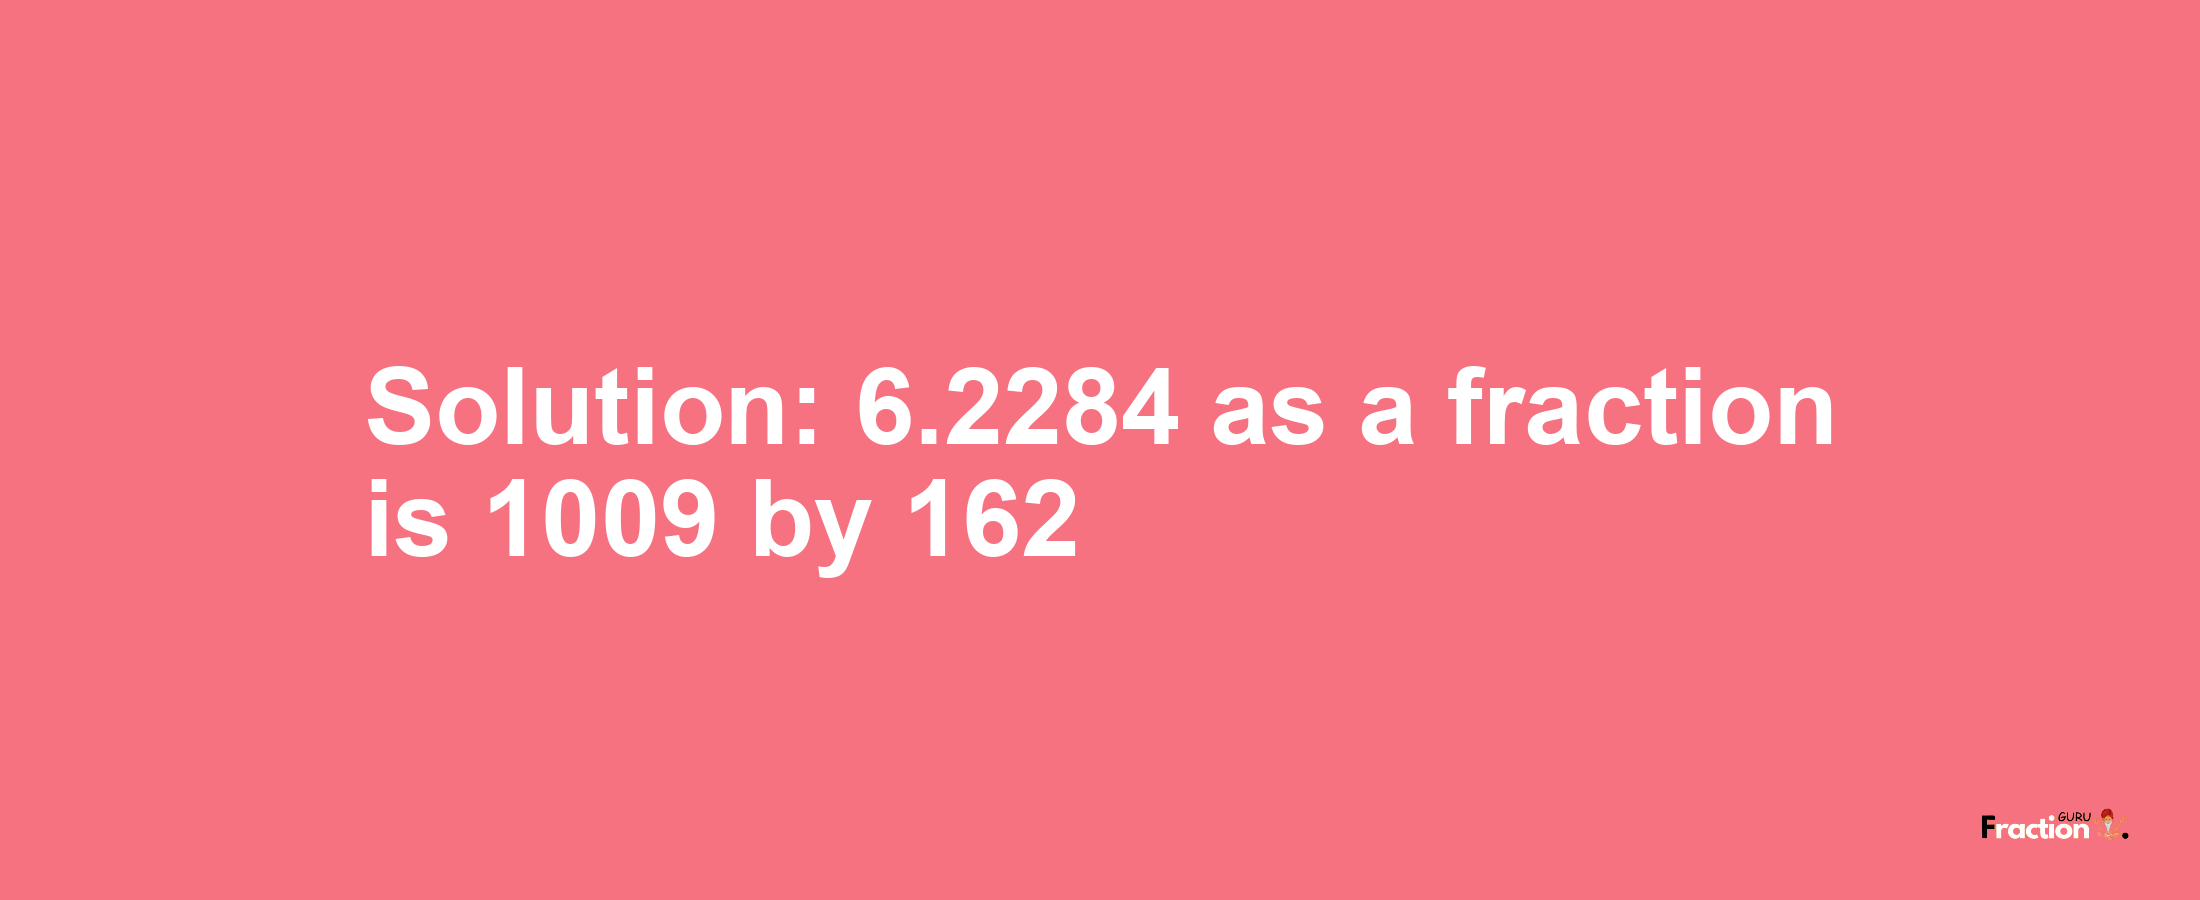 Solution:6.2284 as a fraction is 1009/162